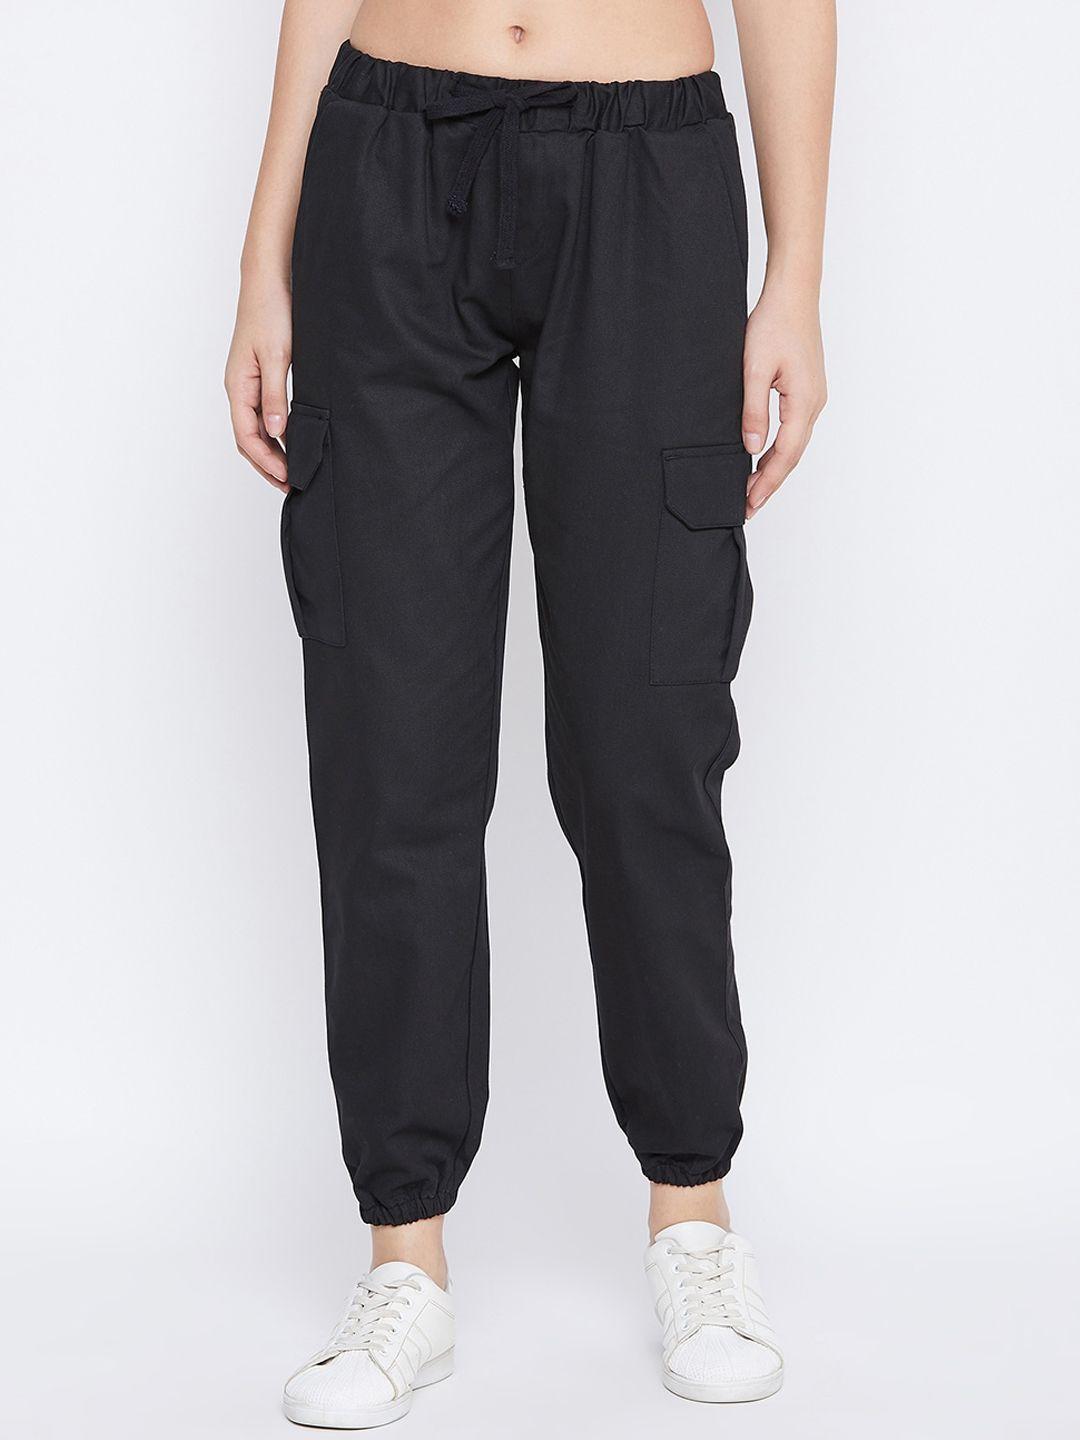 q-rious women mid-rise regular fit joggers trousers